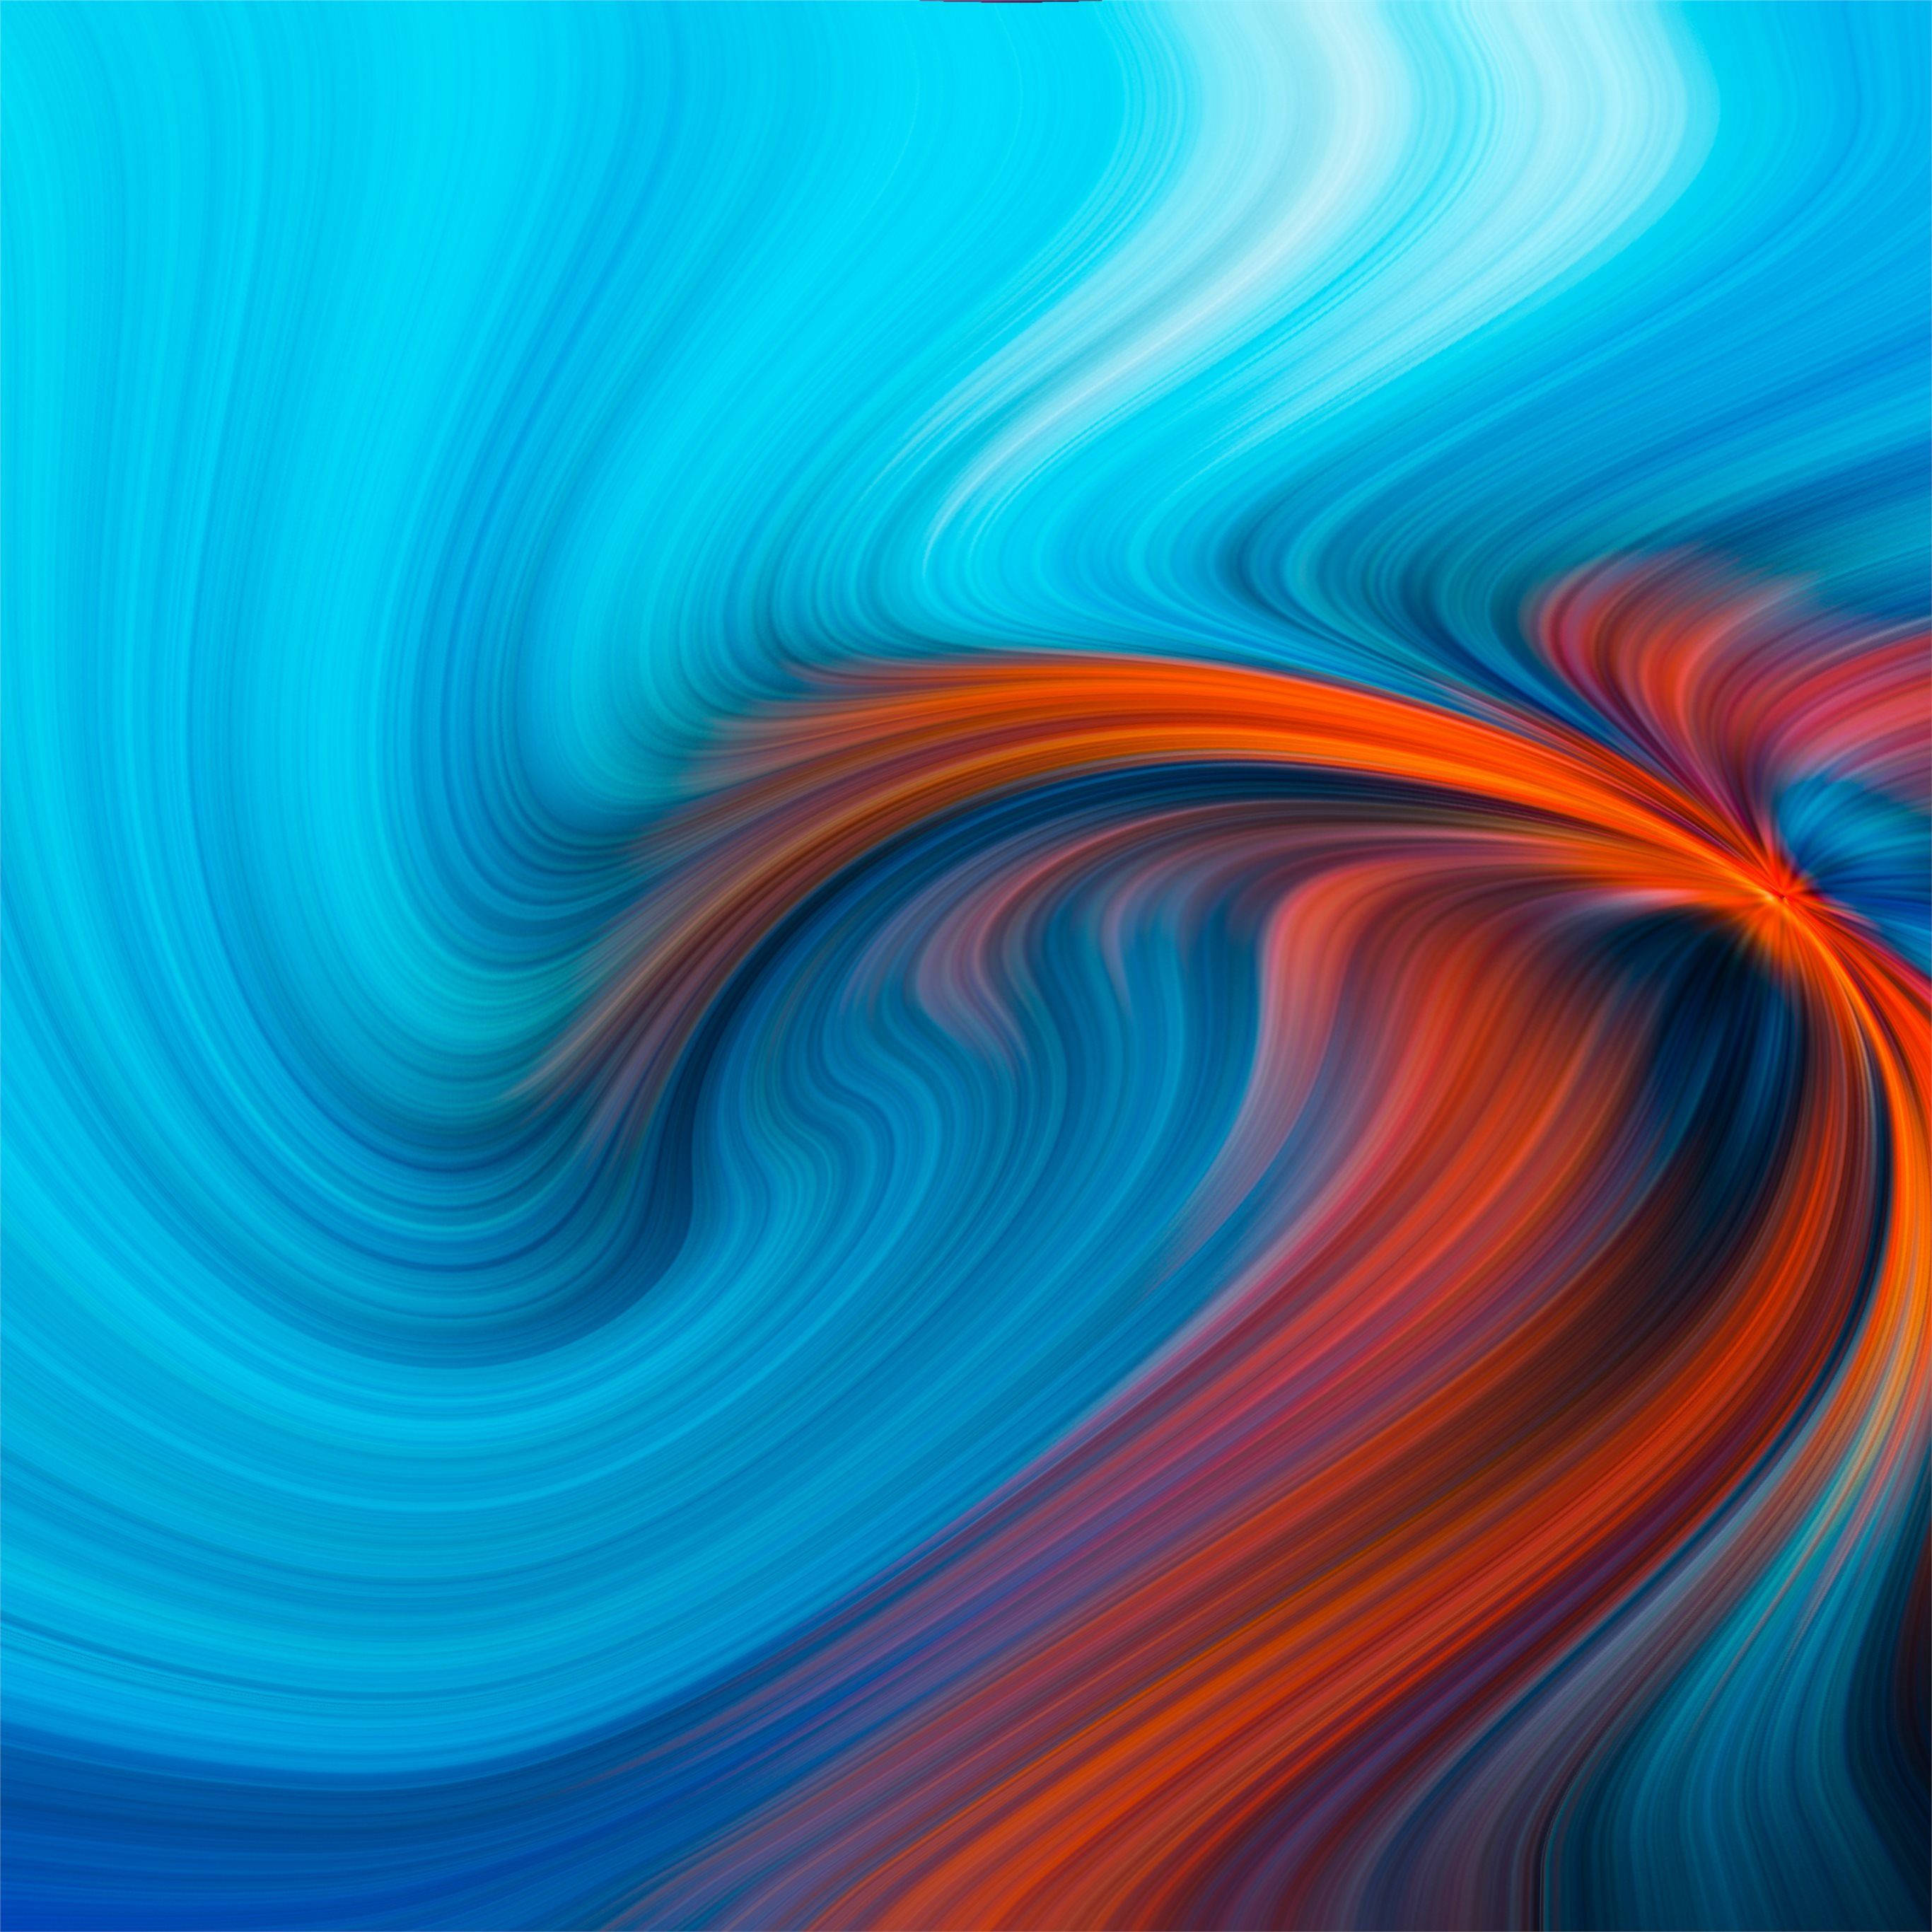 Official Ipad Theme In Abstract Illustration